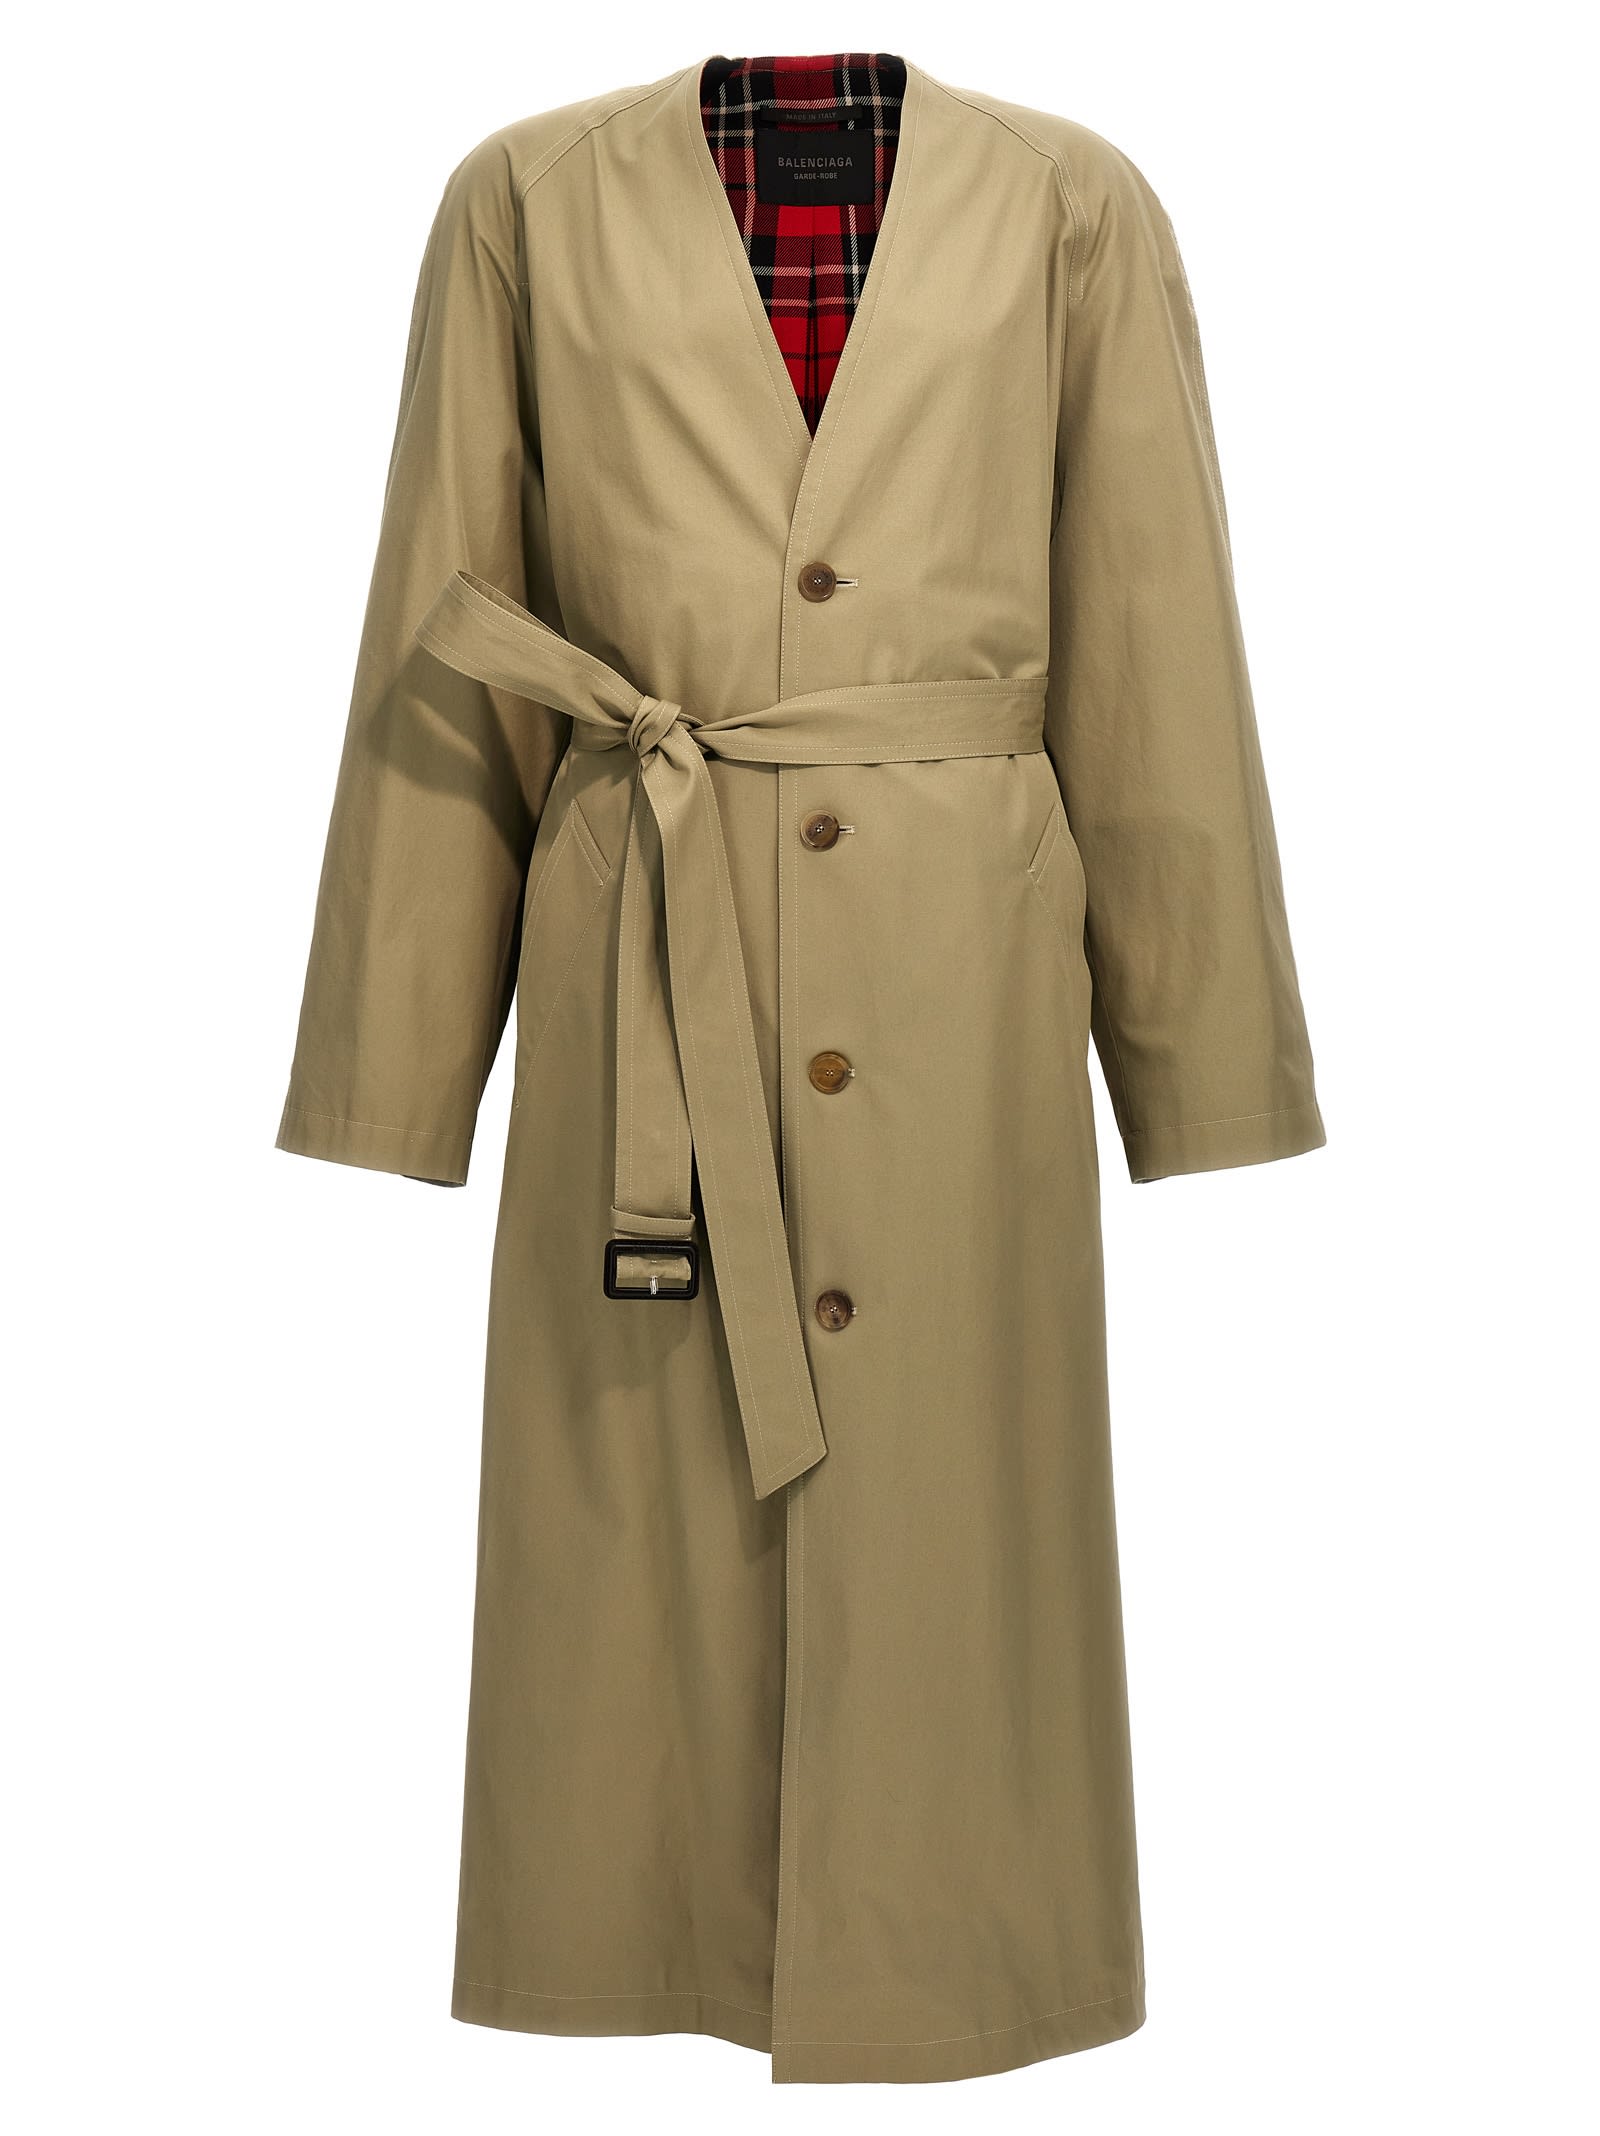 Shop Balenciaga Check Lining Oversize Trench Coat In Beige